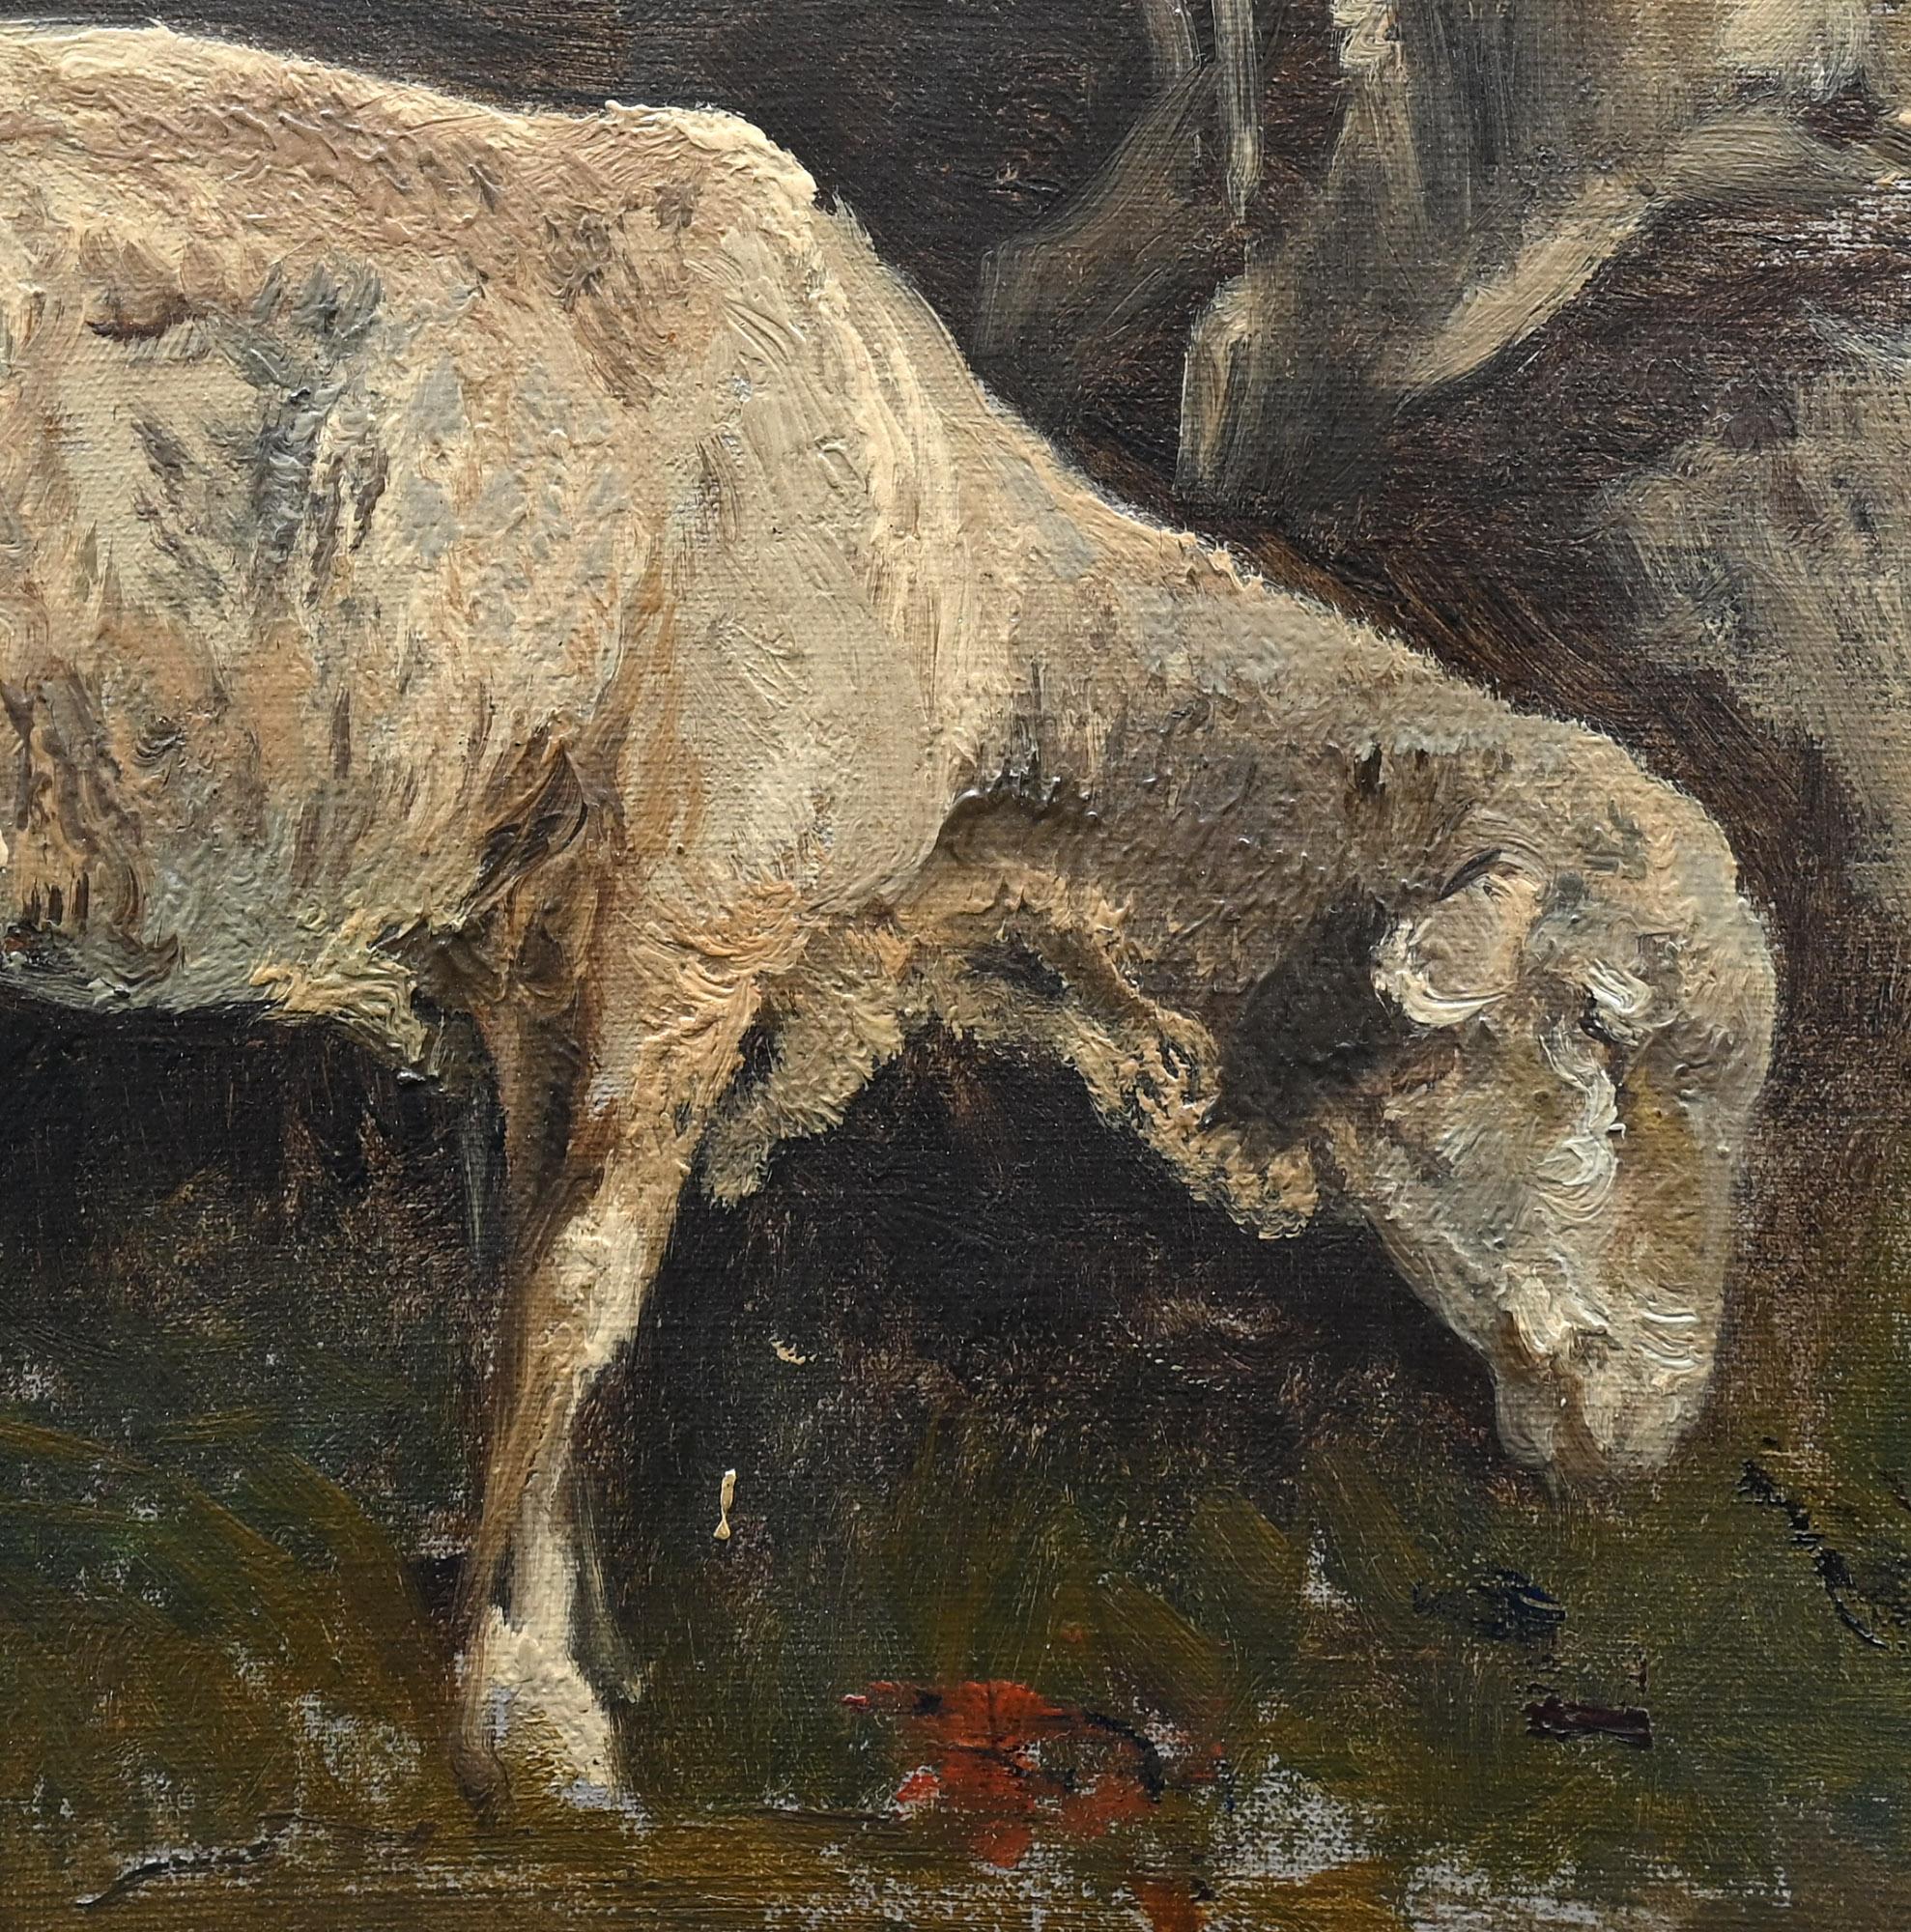 Fine oil study with three sheep,
The study is signed and dated 1870, Wenglein
The artist Josef Wenglein was an bavarian landscape painter. 1845-1919,
He was born 1845 in Munich and passed away 1919 in Bad Tölz, Bavaria.
 